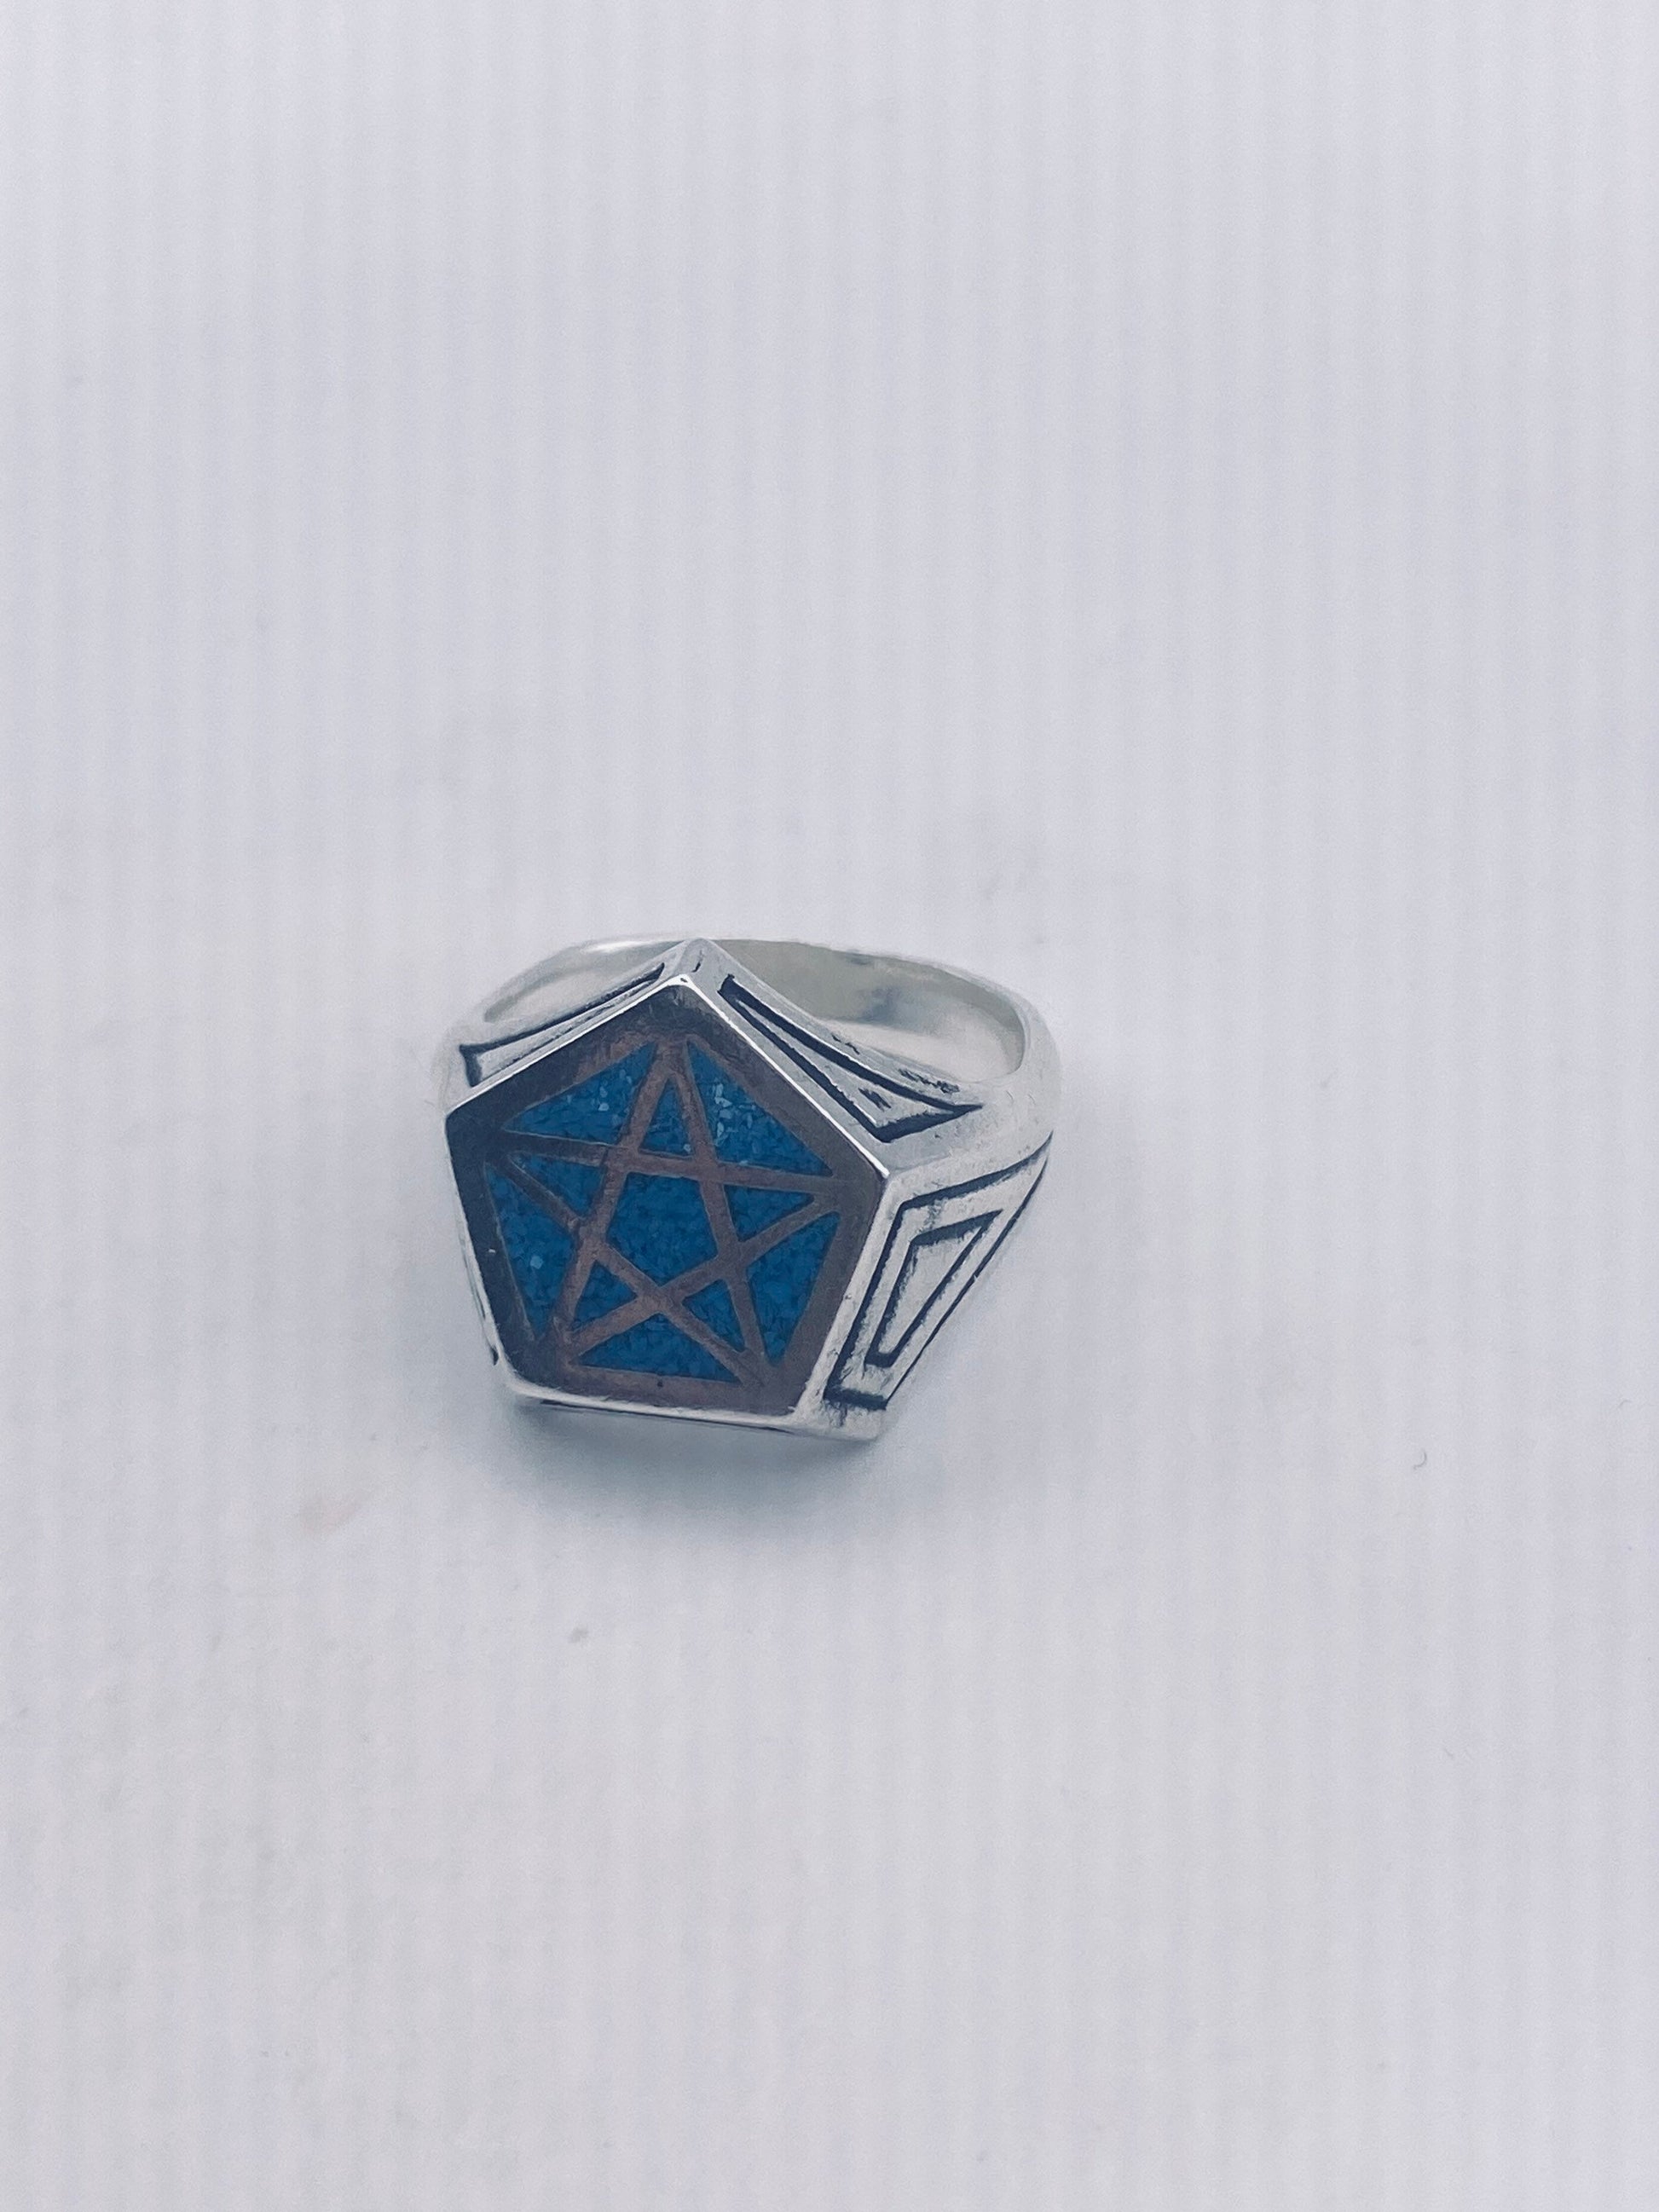 Vintage Gothic Blue Turquoise Pentacle Star Mens Ring